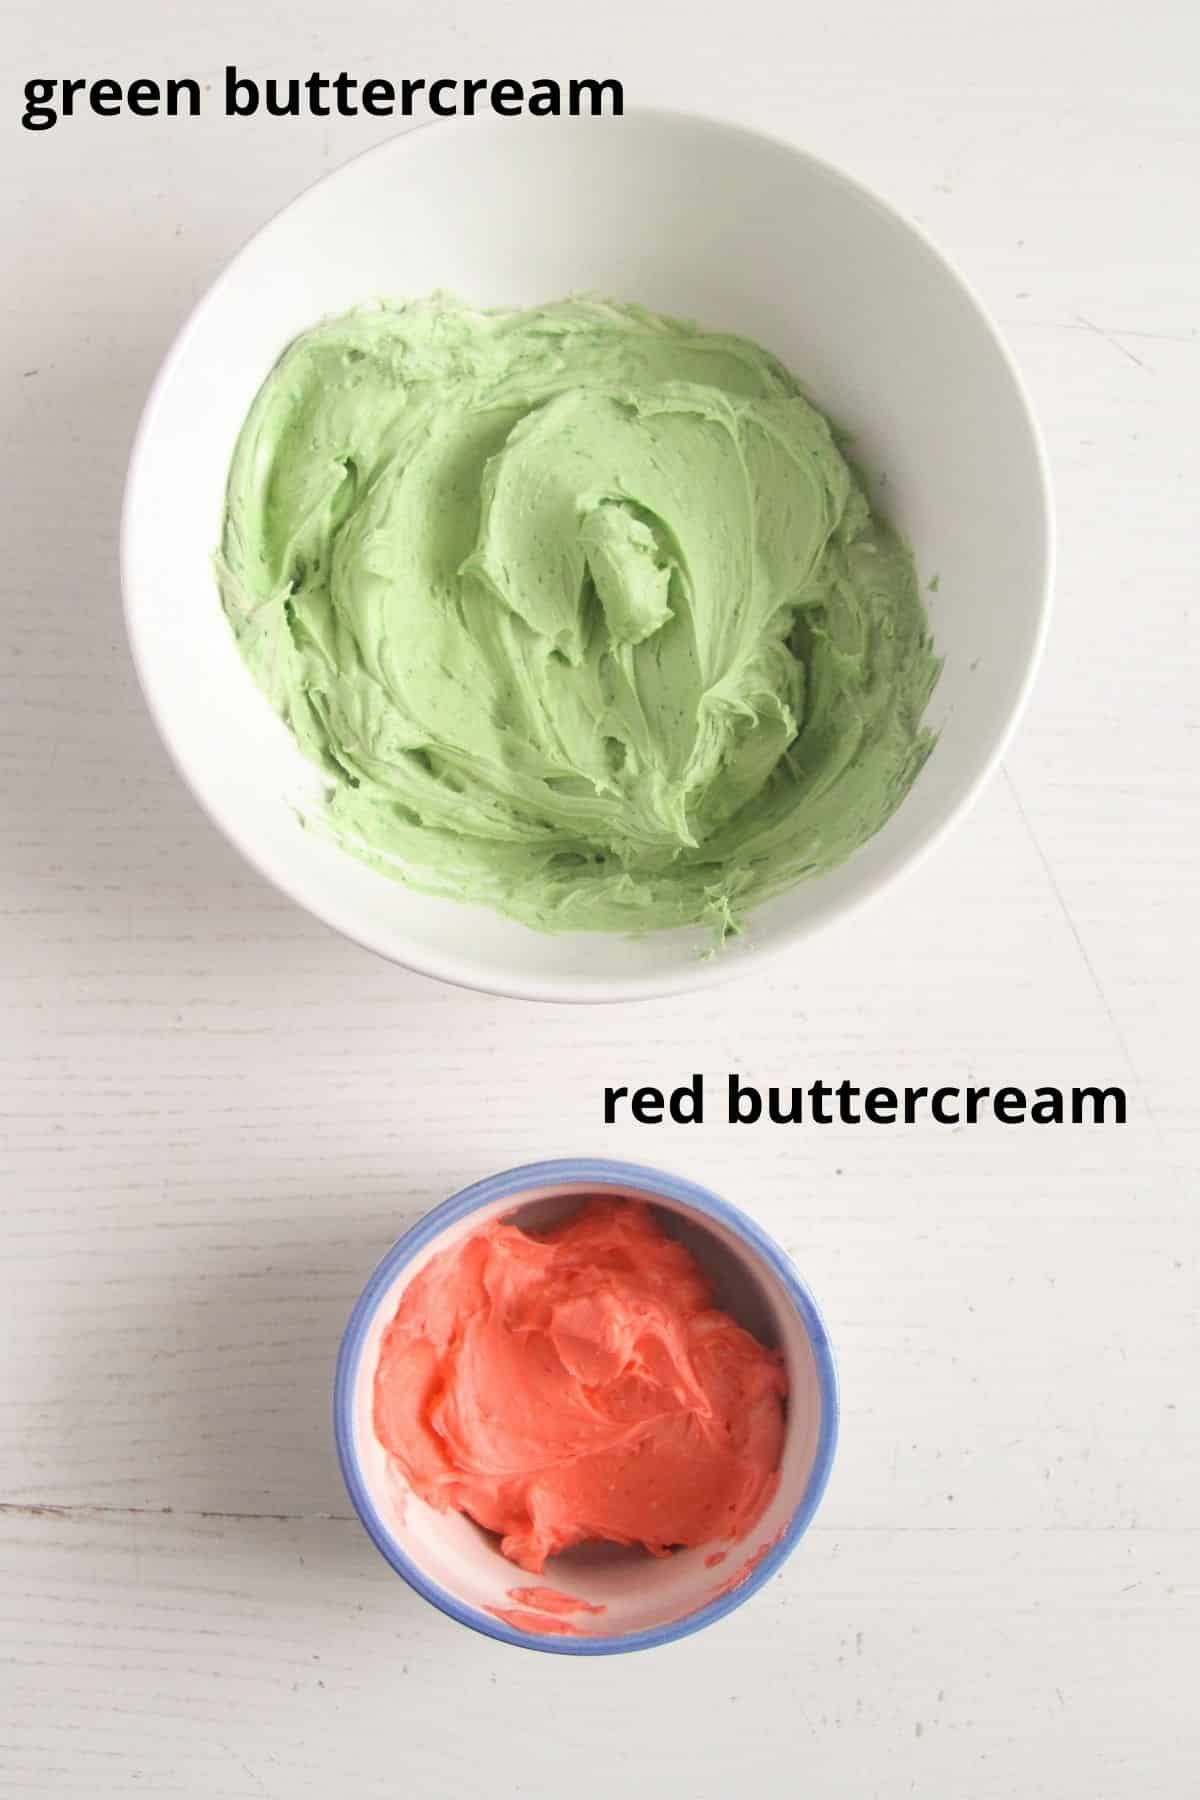 two bowls with green and red buttercream.